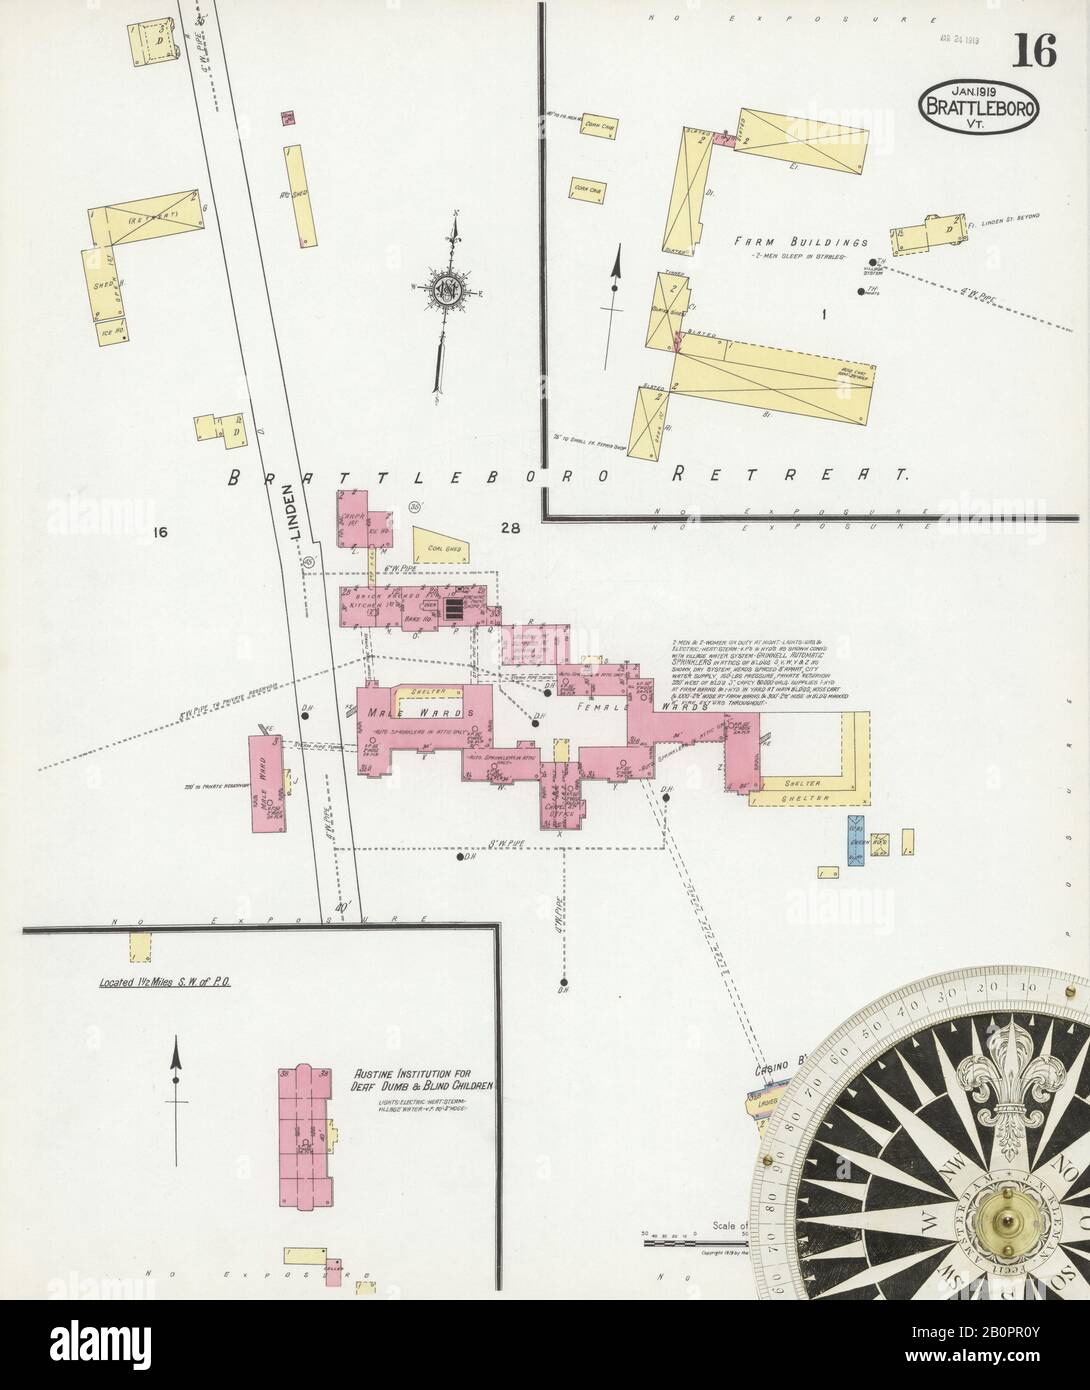 Image 16 of Sanborn Fire Insurance Map from Brattleboro, Windham County, Vermont. Jan 1919. 19 Sheet(s), America, street map with a Nineteenth Century compass Stock Photo